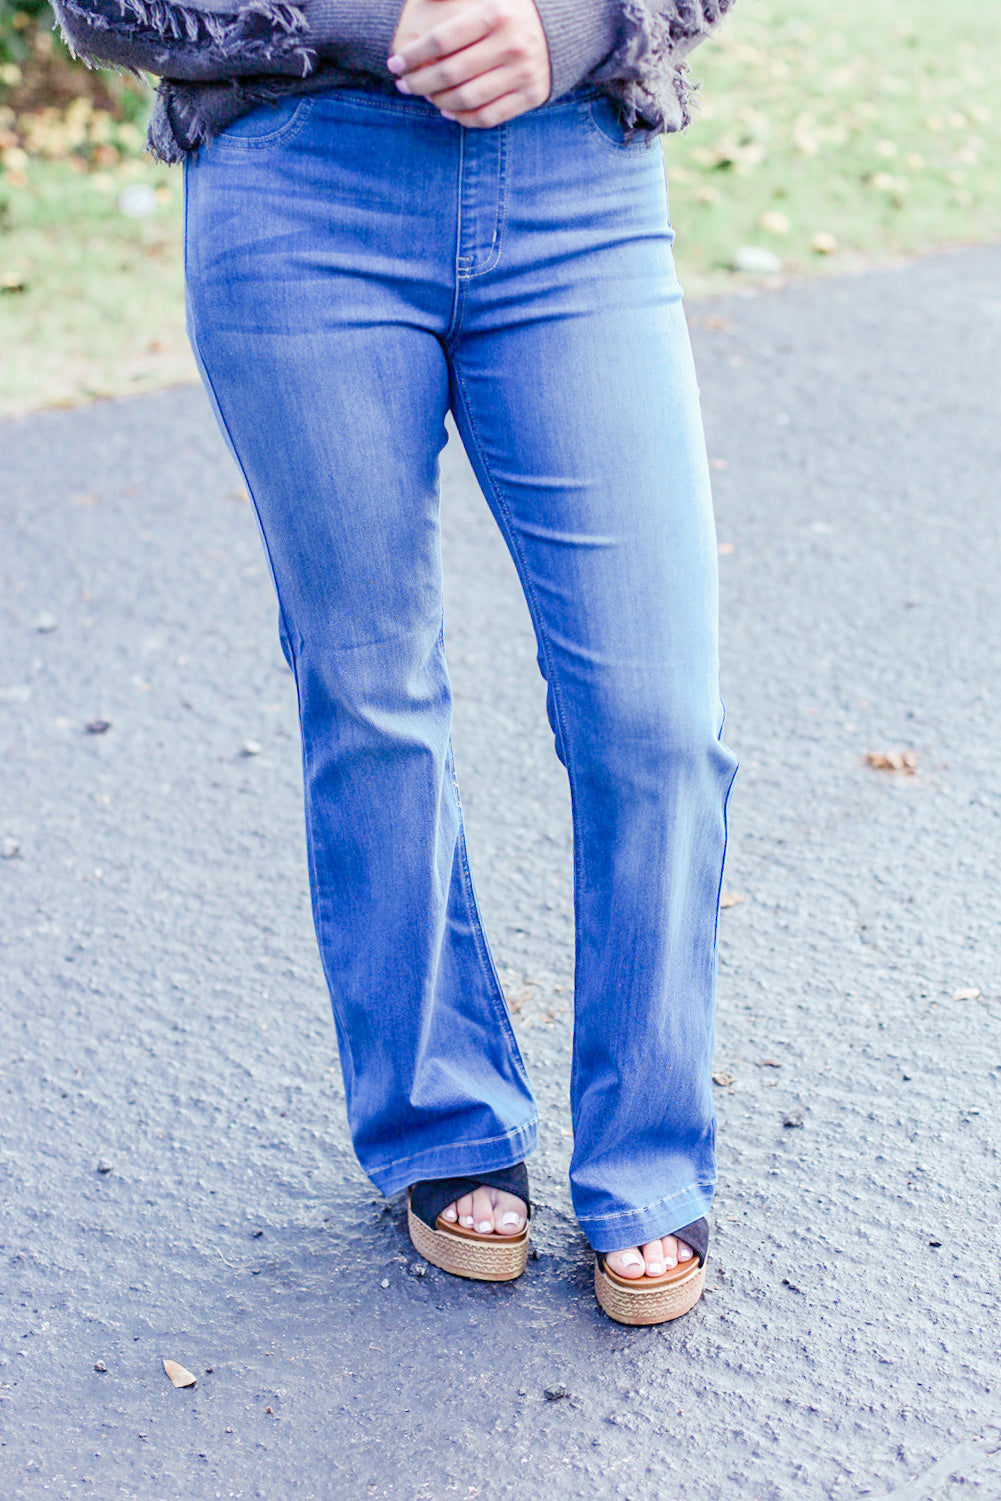 Cello Jeans – Taylor's Boutique and Tanning